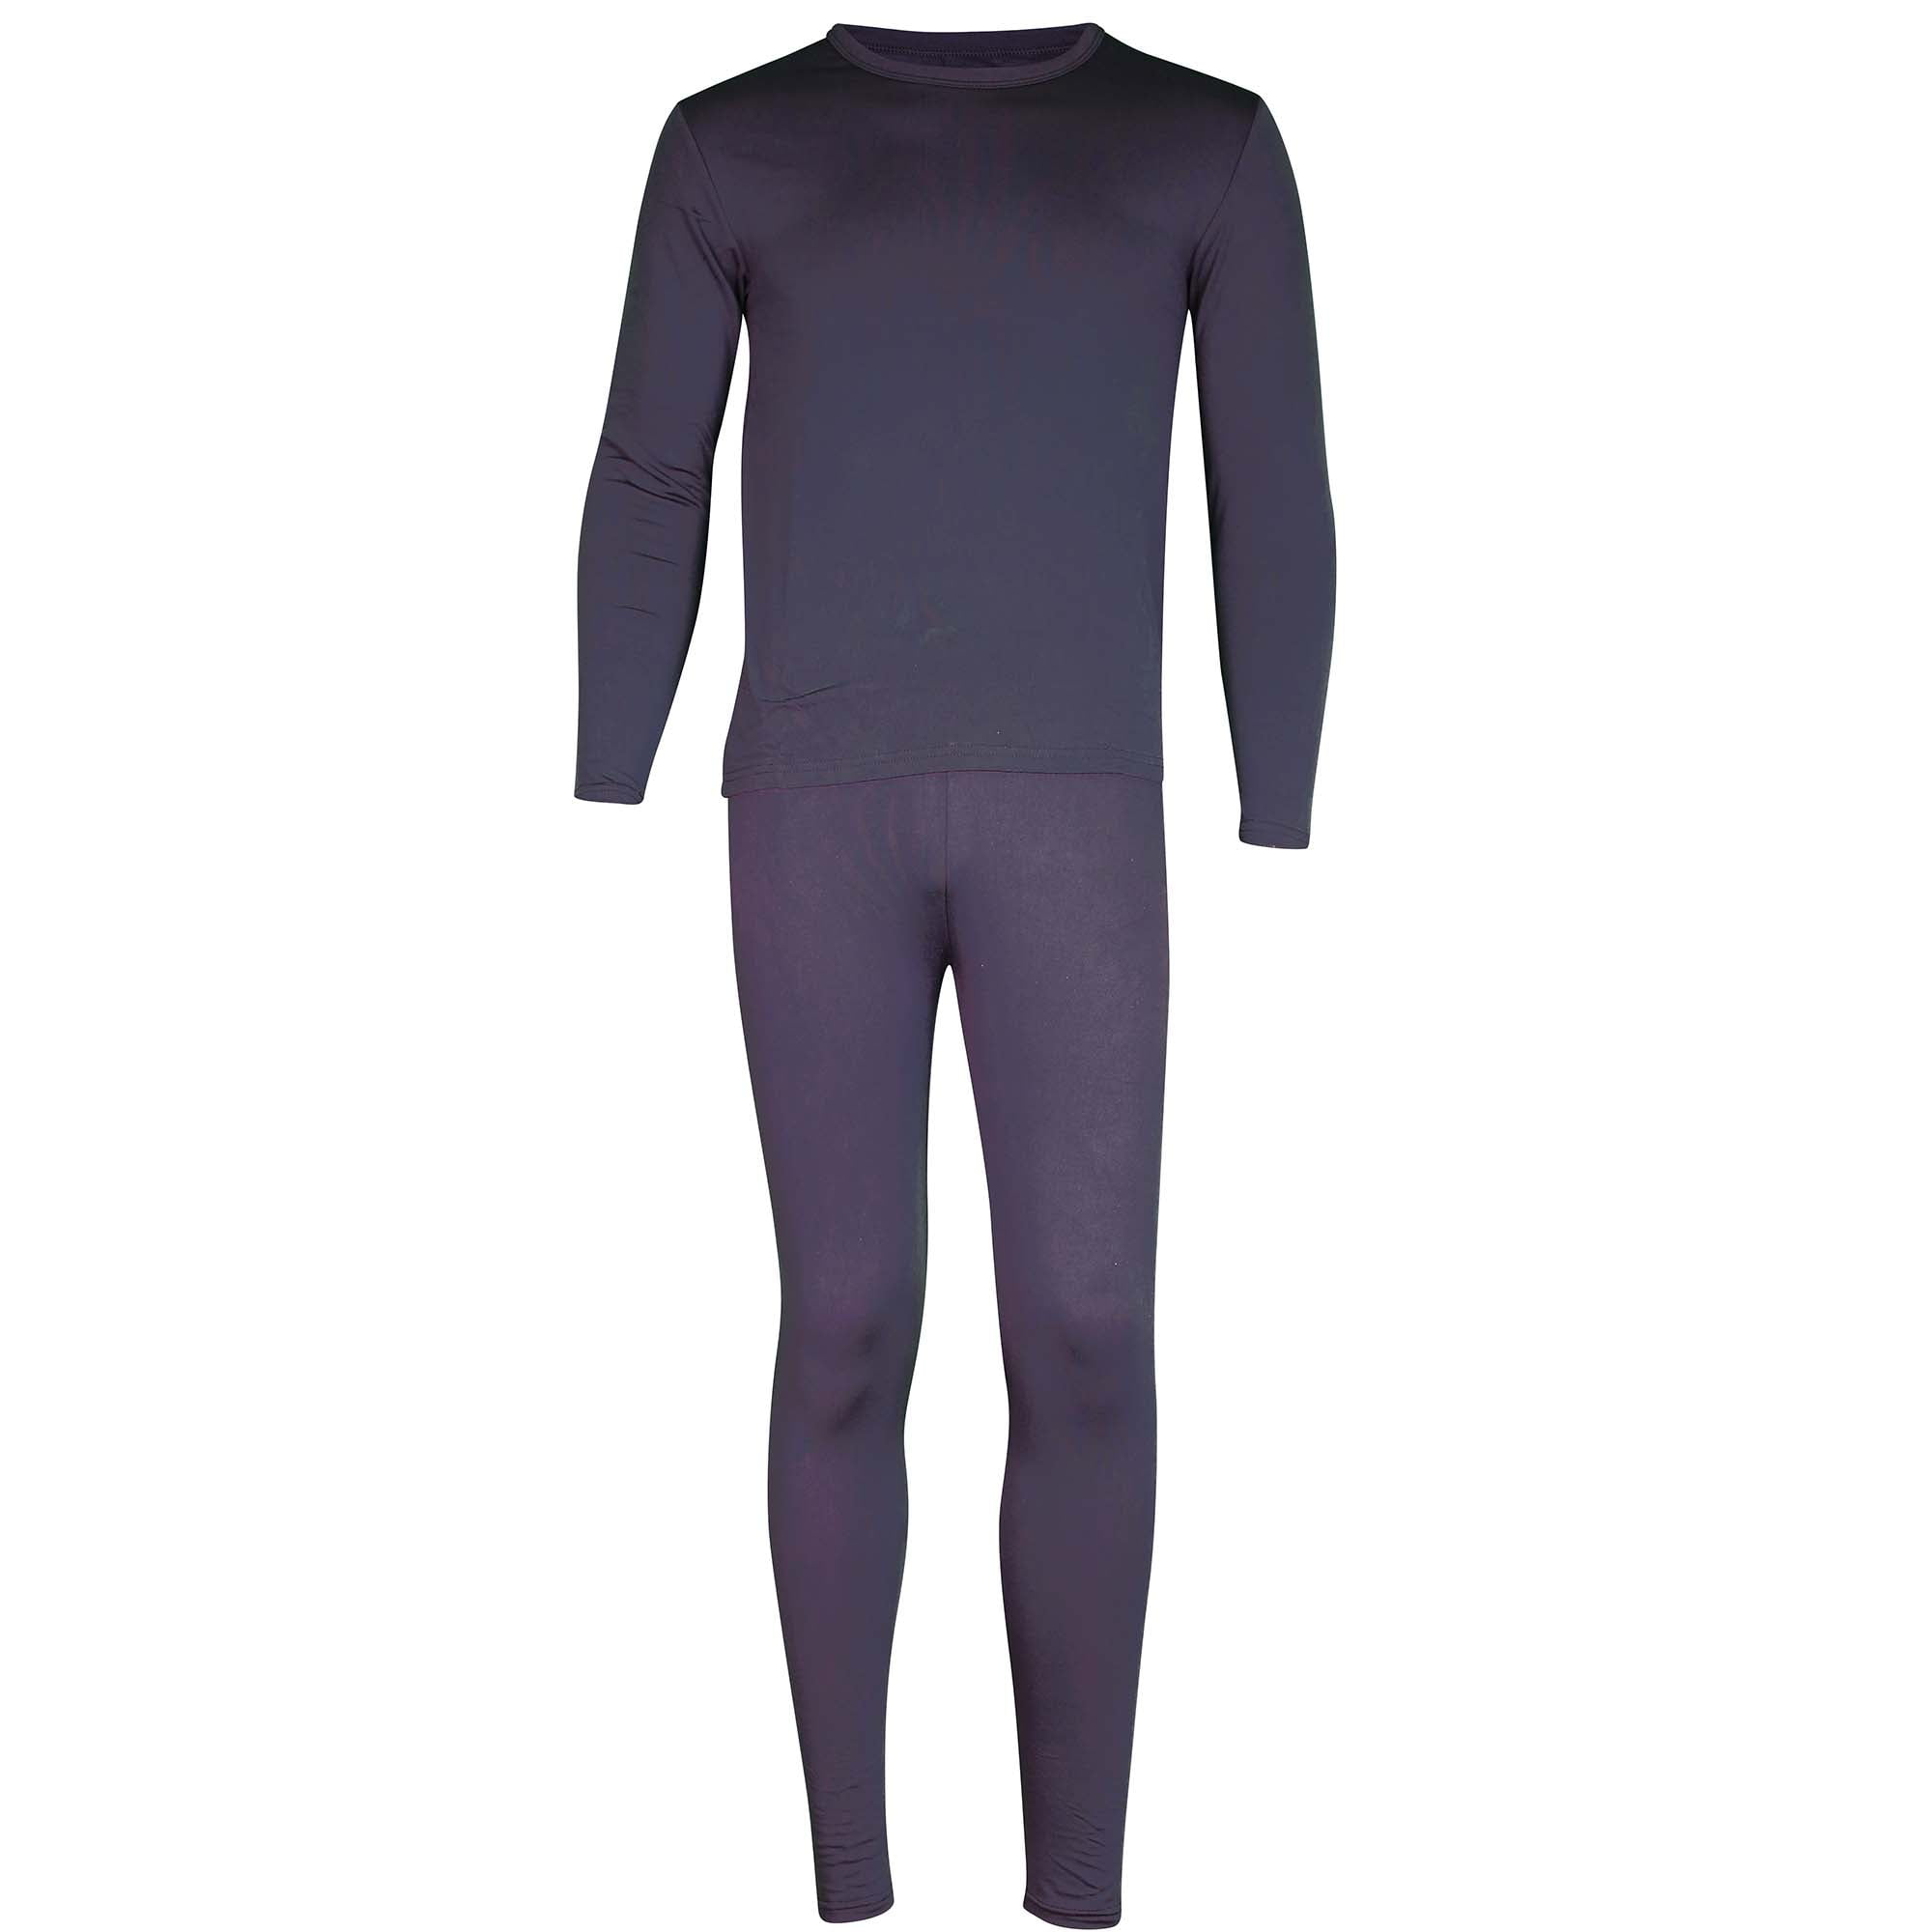 SLM Men's Fleece Lined Thermal Underwear sets Insulated Long John Cotton  Base Layer with Top and Pants 